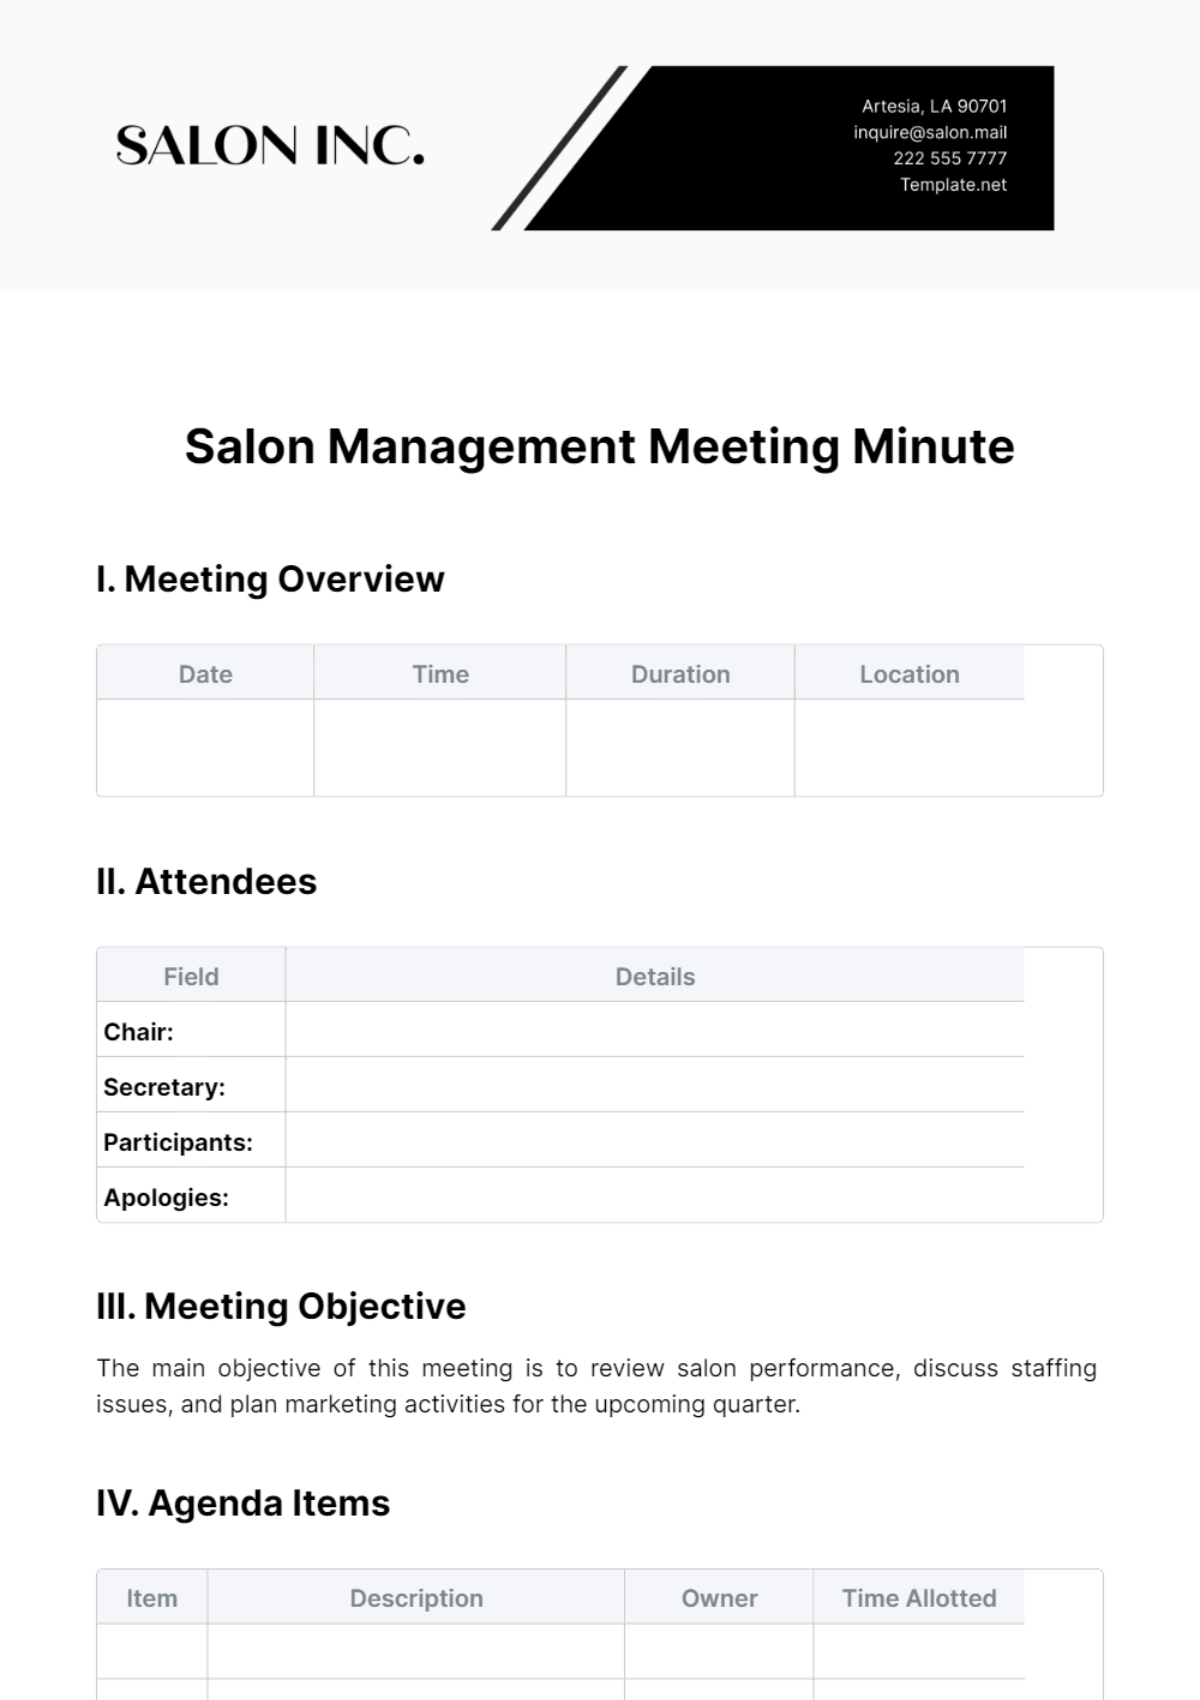 Free Salon Management Meeting Minute Template